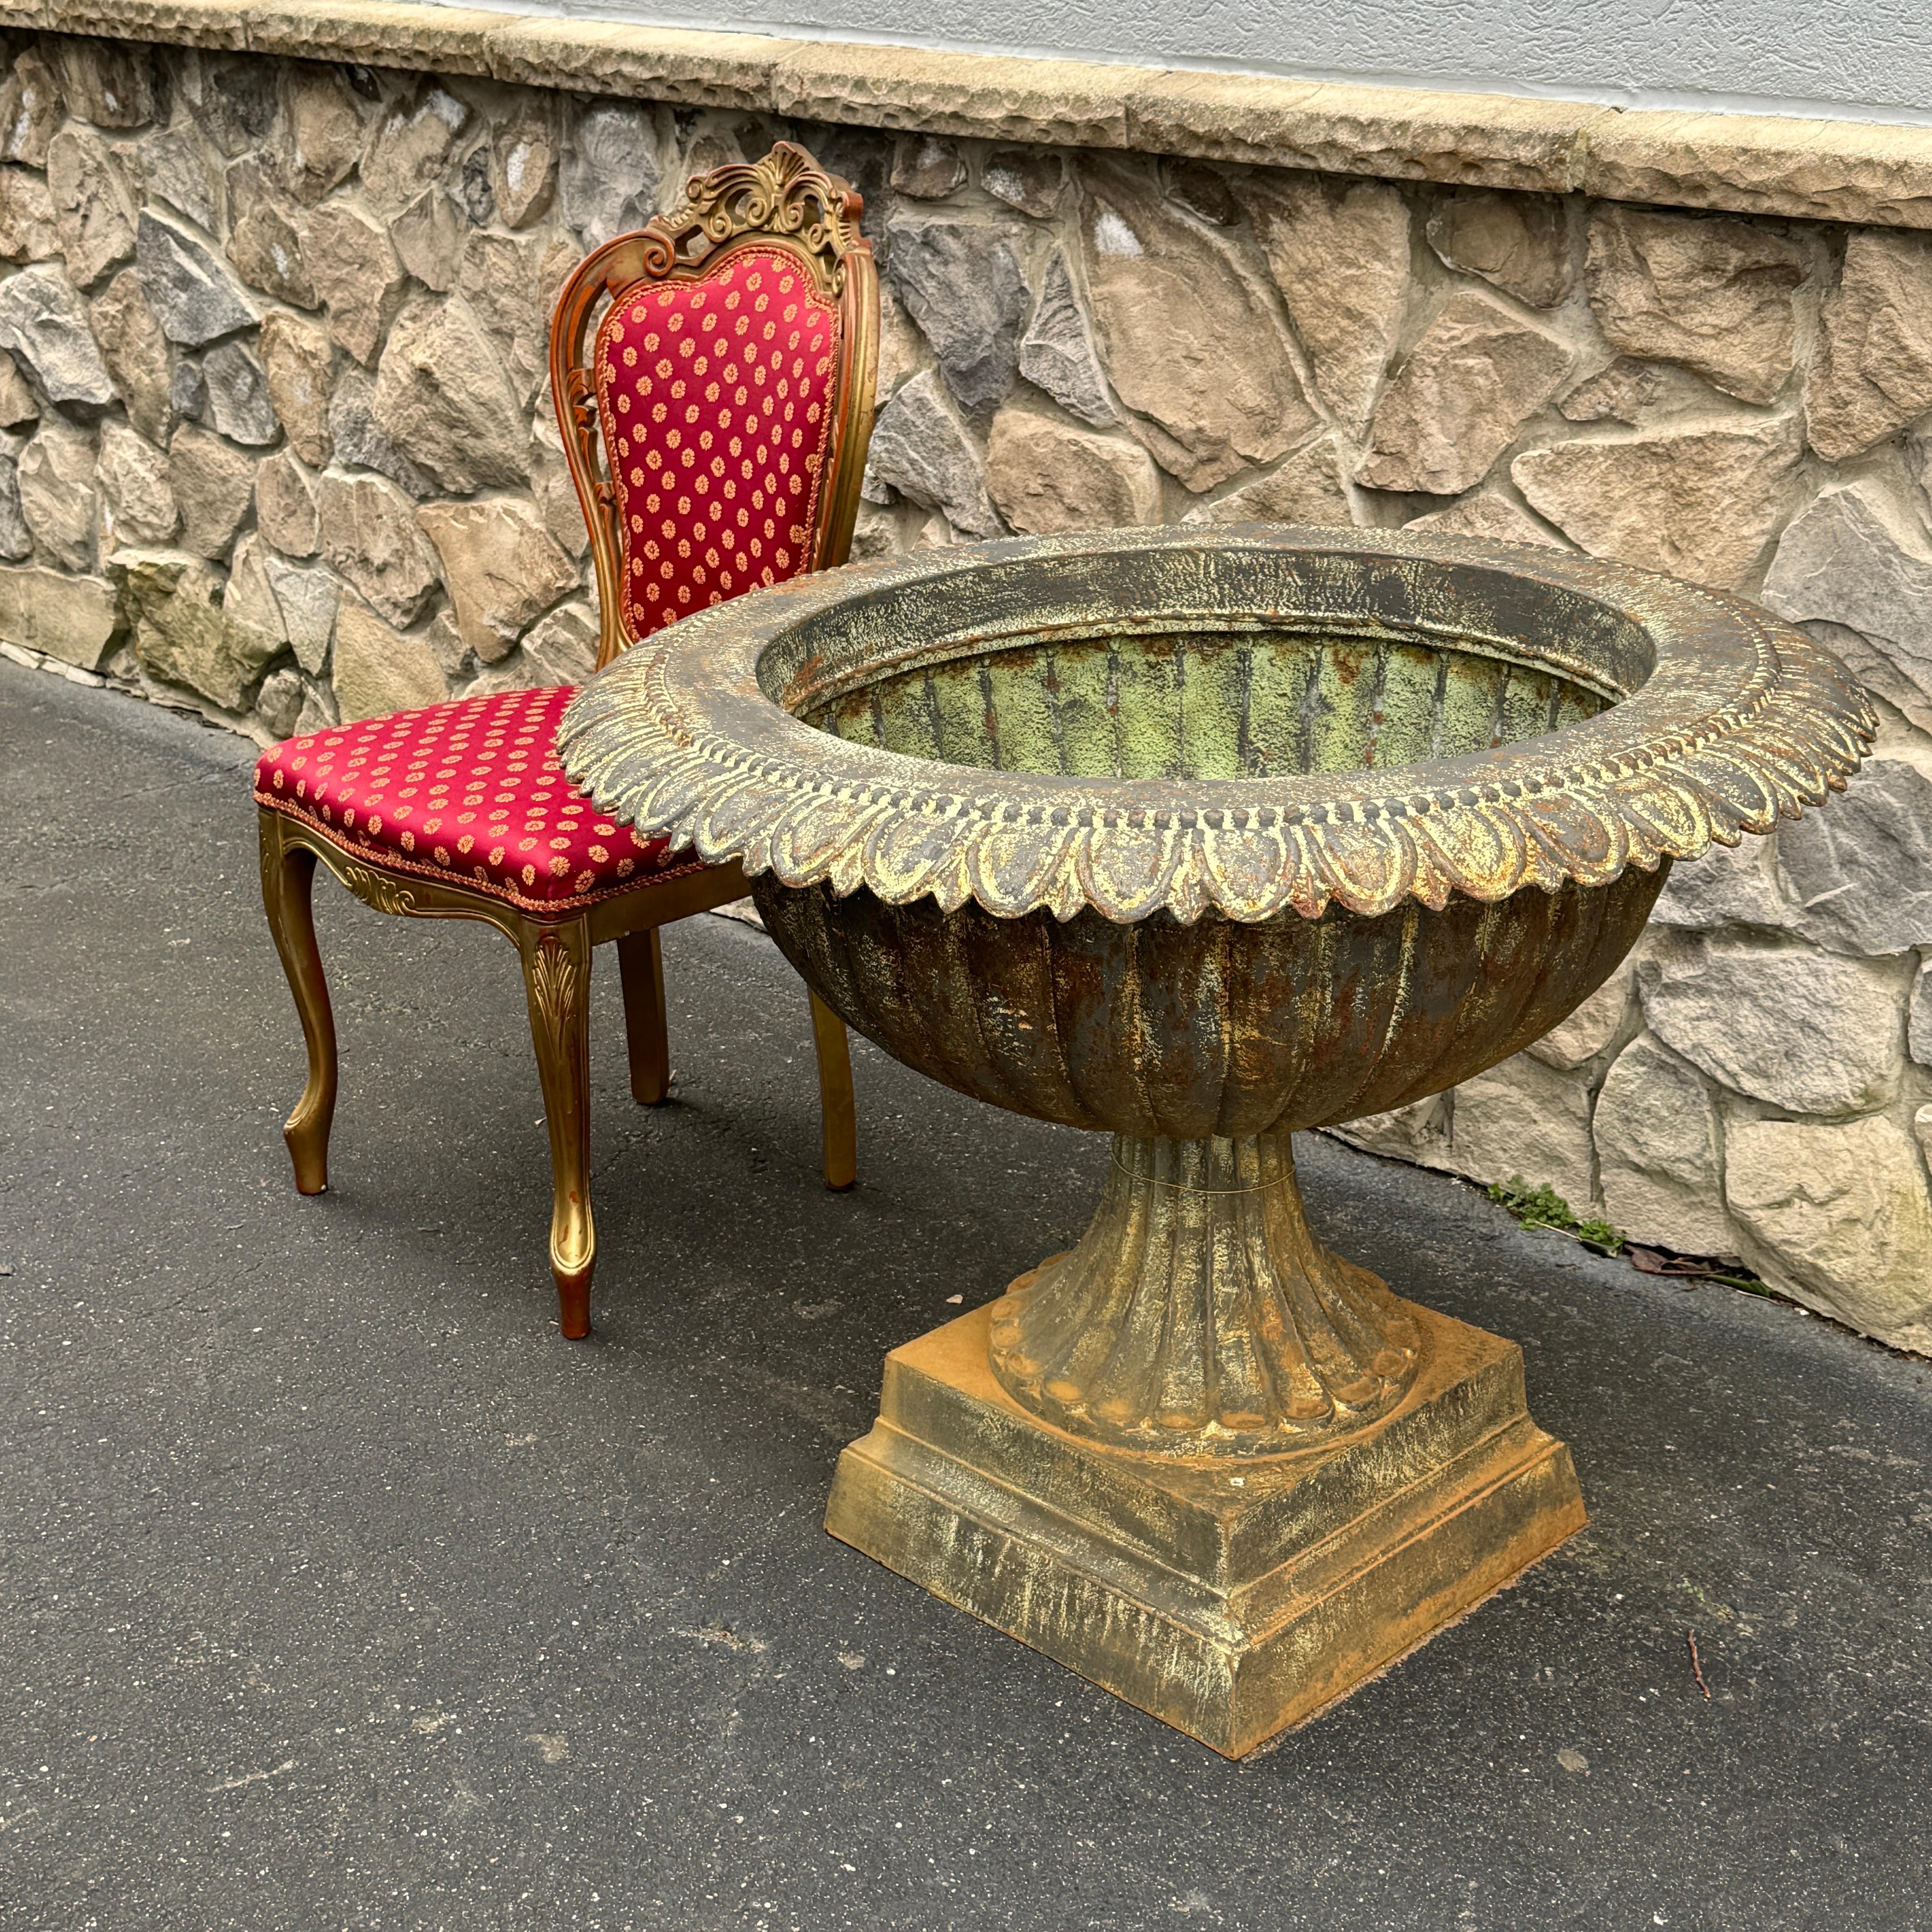 Unusual Large Round Cast Iron Planter. This is a heavy and very large is size, so please see all listed image to gage the size. This would be a charming addition for the garden or any interior patio as this urn certainly will add personality to any